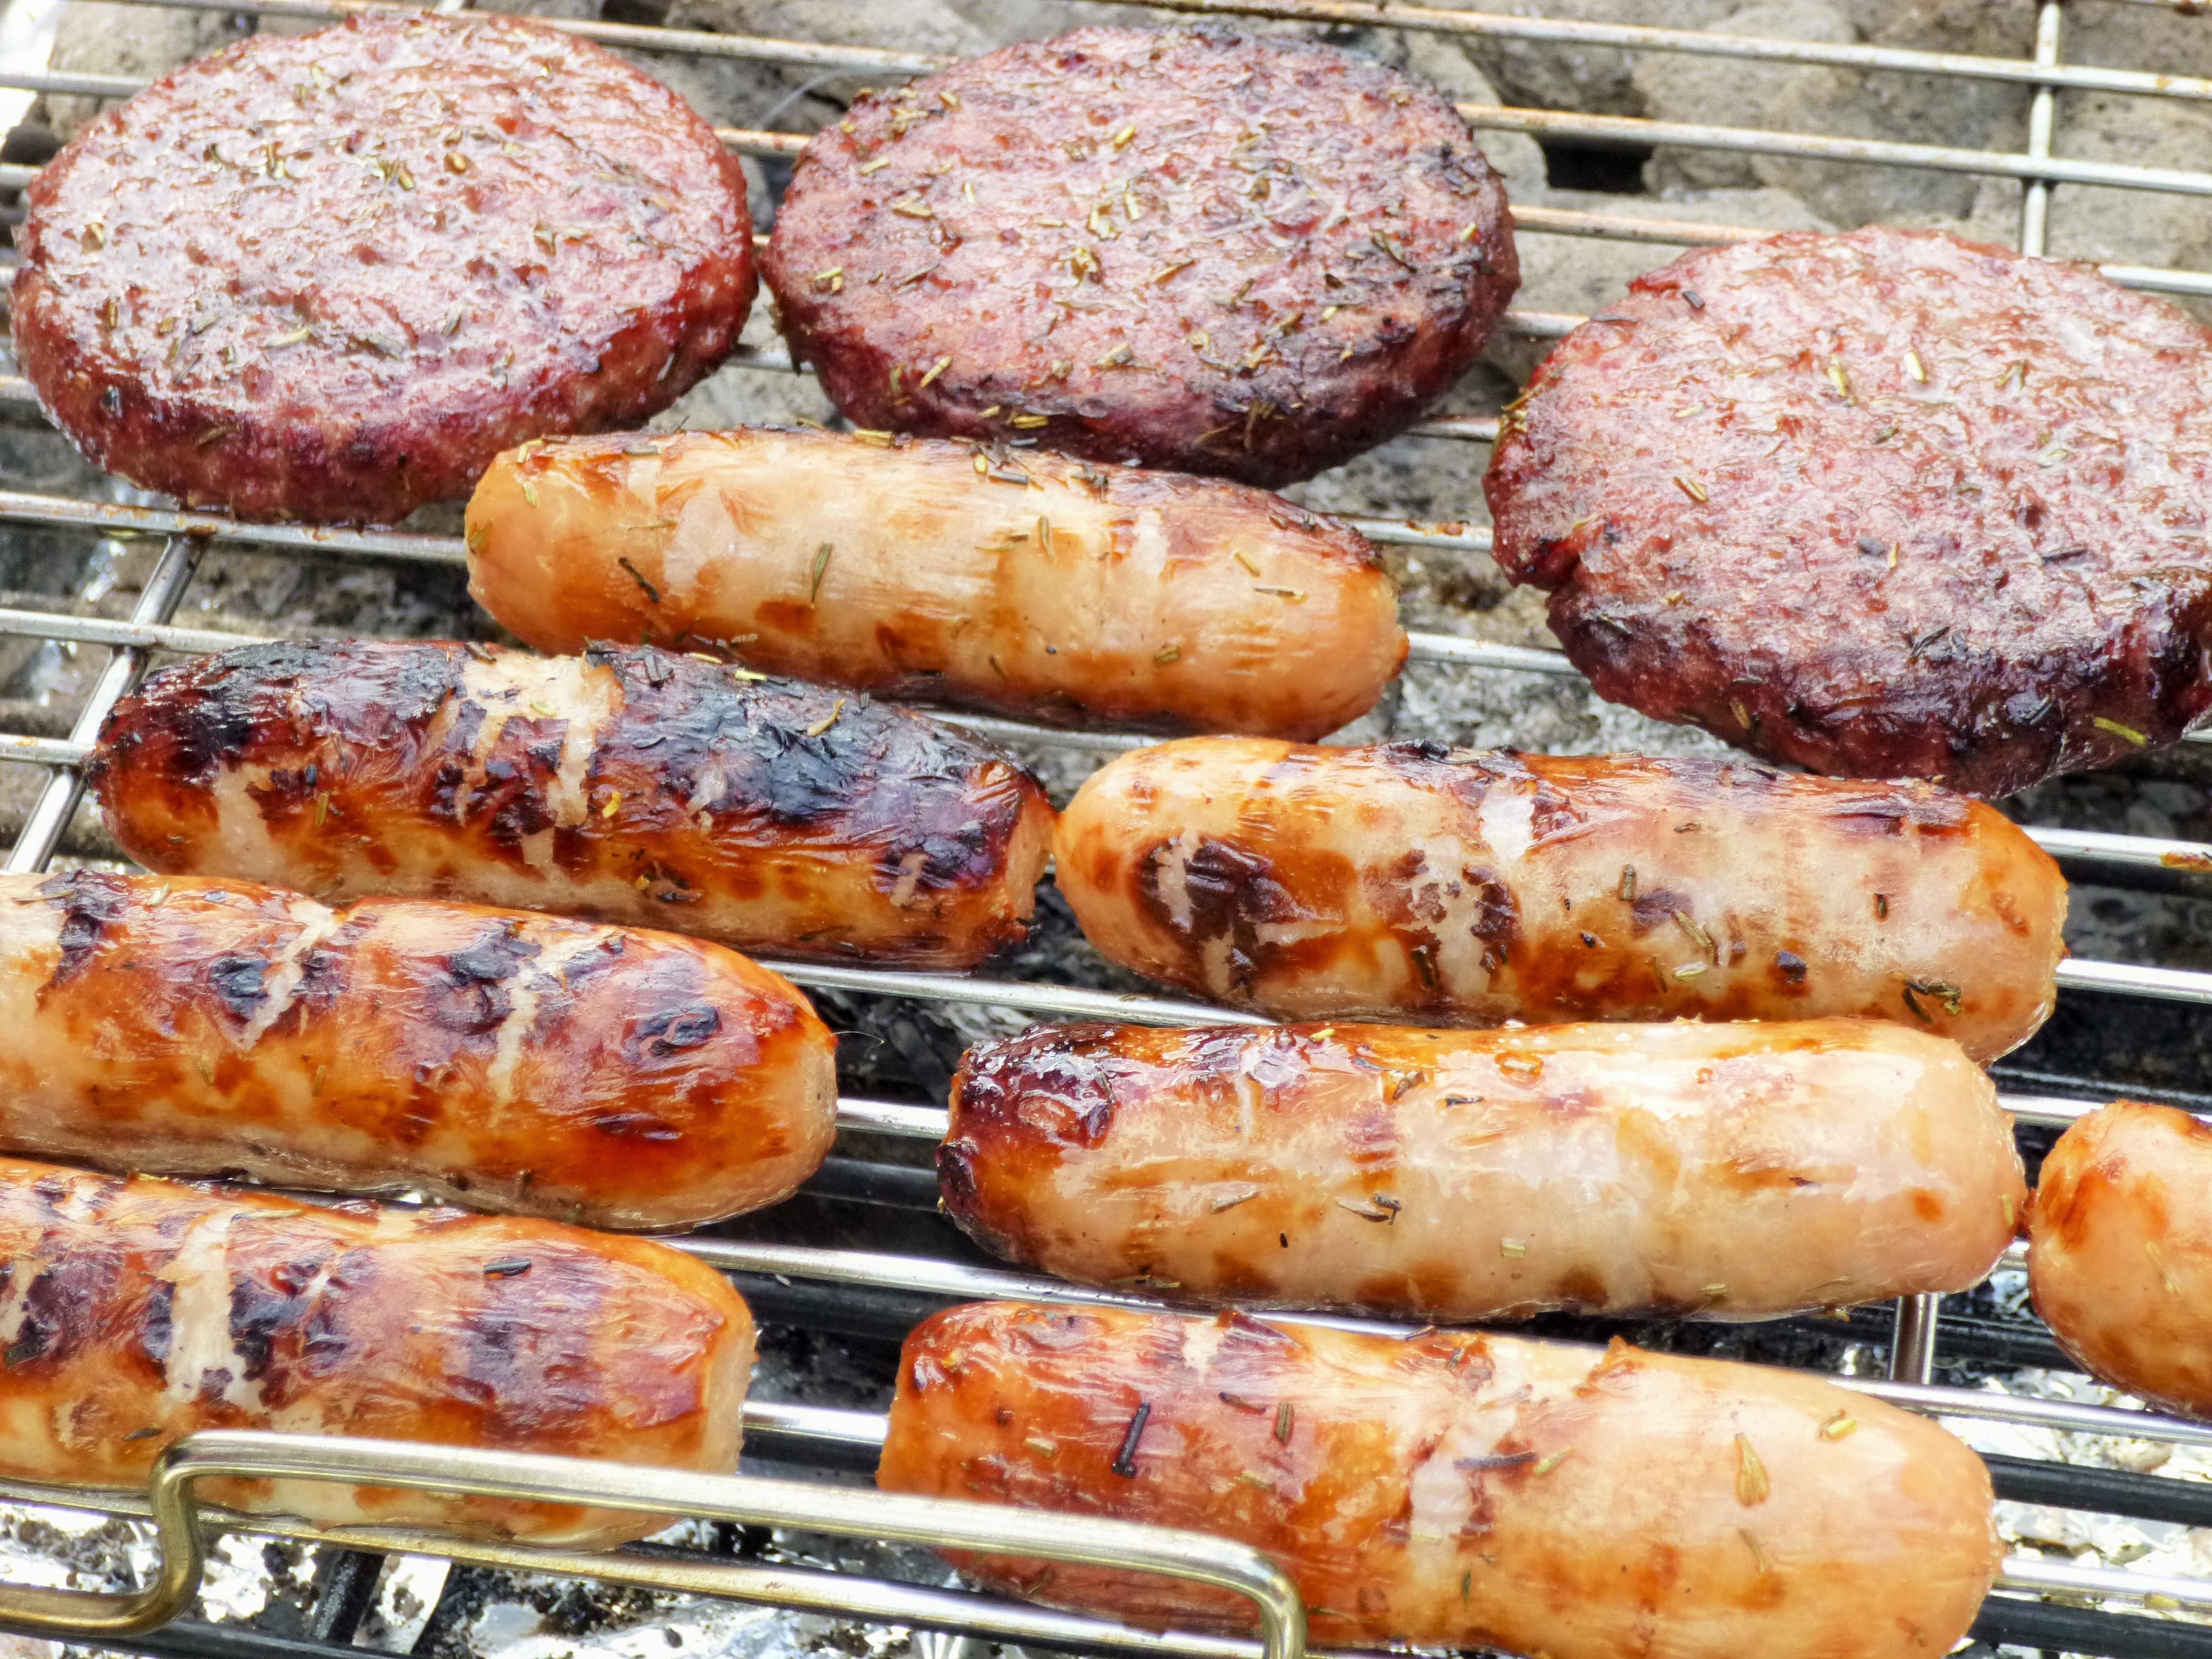 Barbecue sausages burgers BBQ